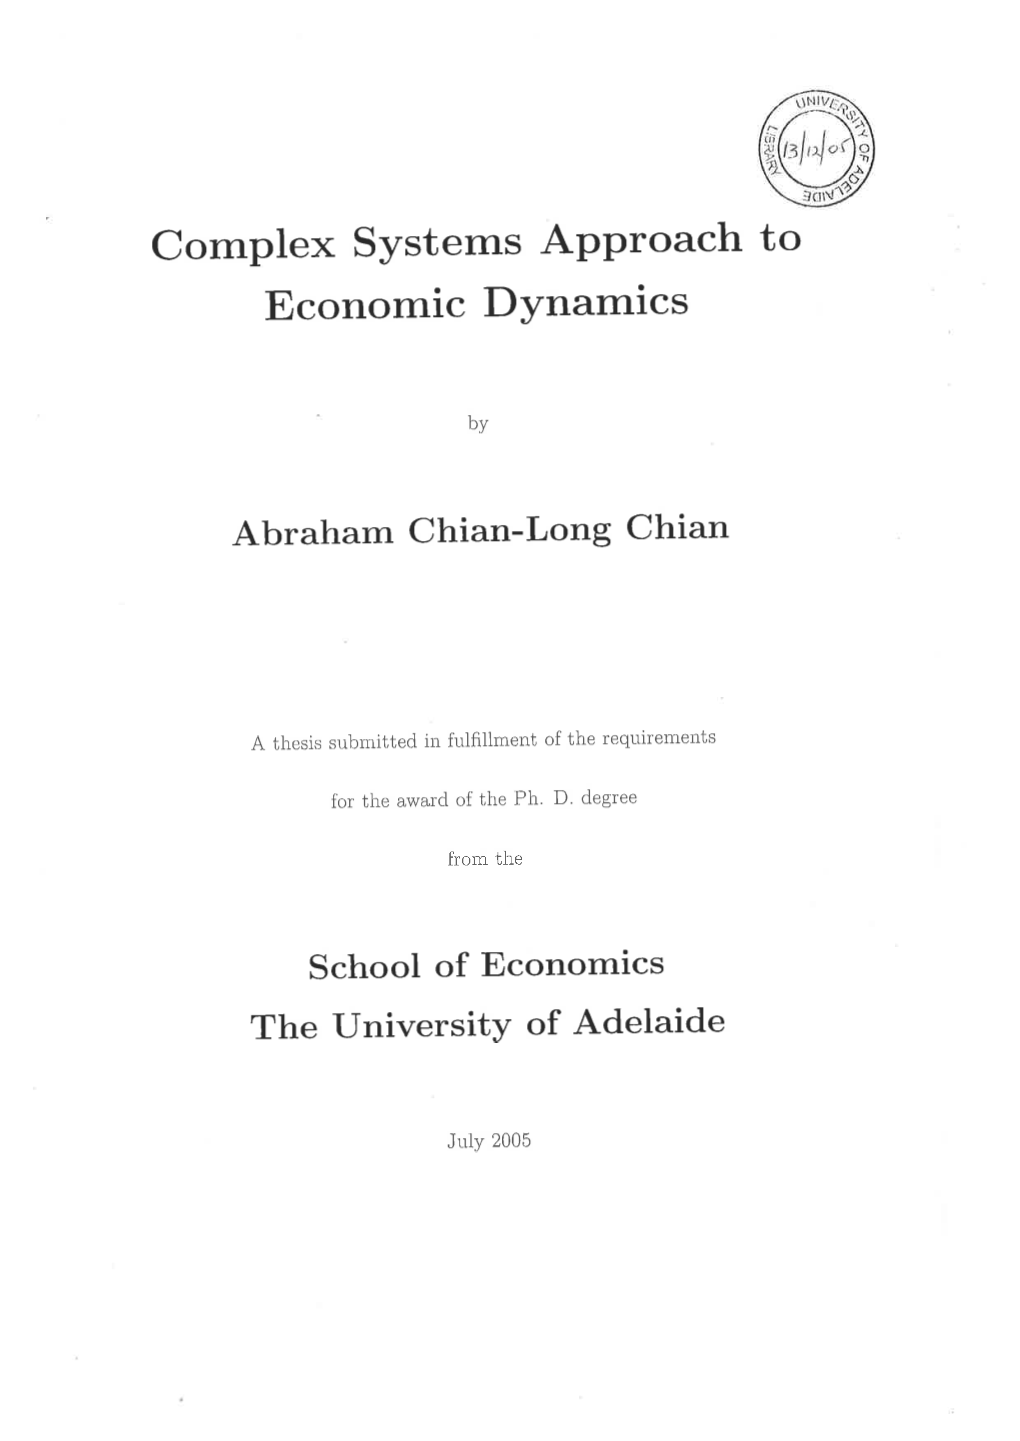 Complex Systems Approach to Economic Dynamics